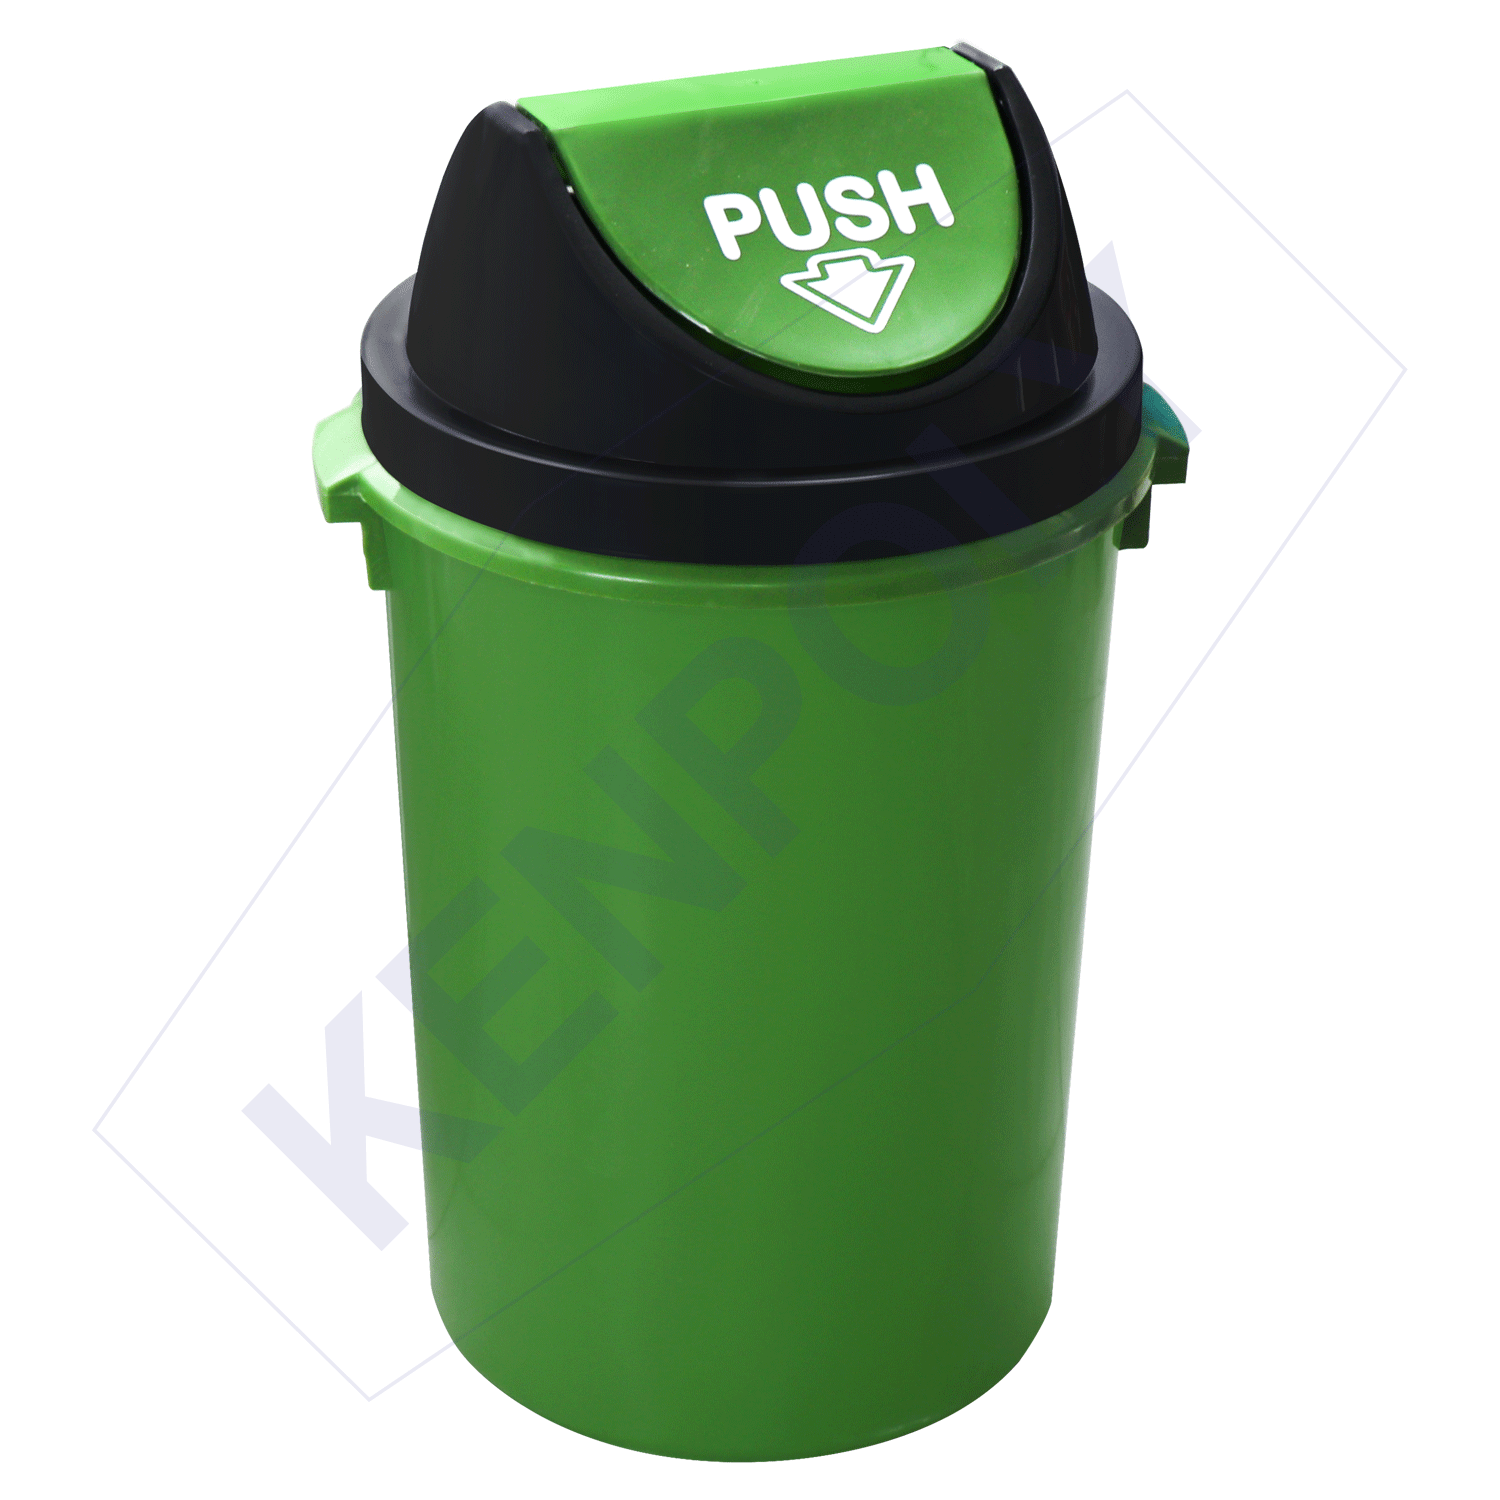 Kenpoly Swing Bin No.1 – 68L: Convenient and Stylish Inflatable Dust Bin